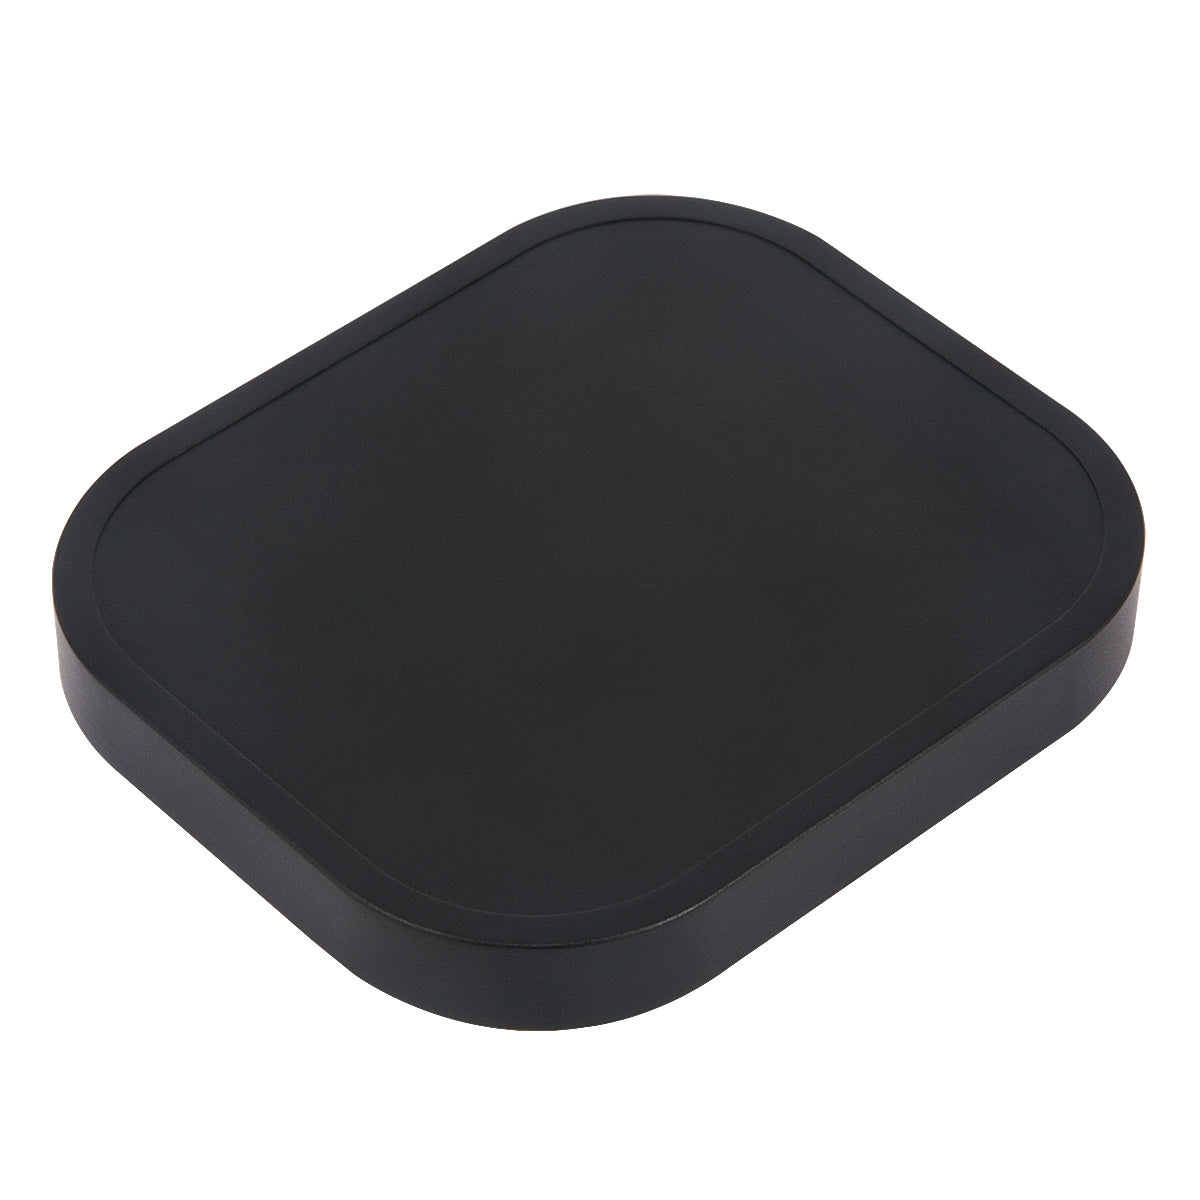 Haoge Square Metal Cover Cap for Haoge Specific Square Lens Hood Black